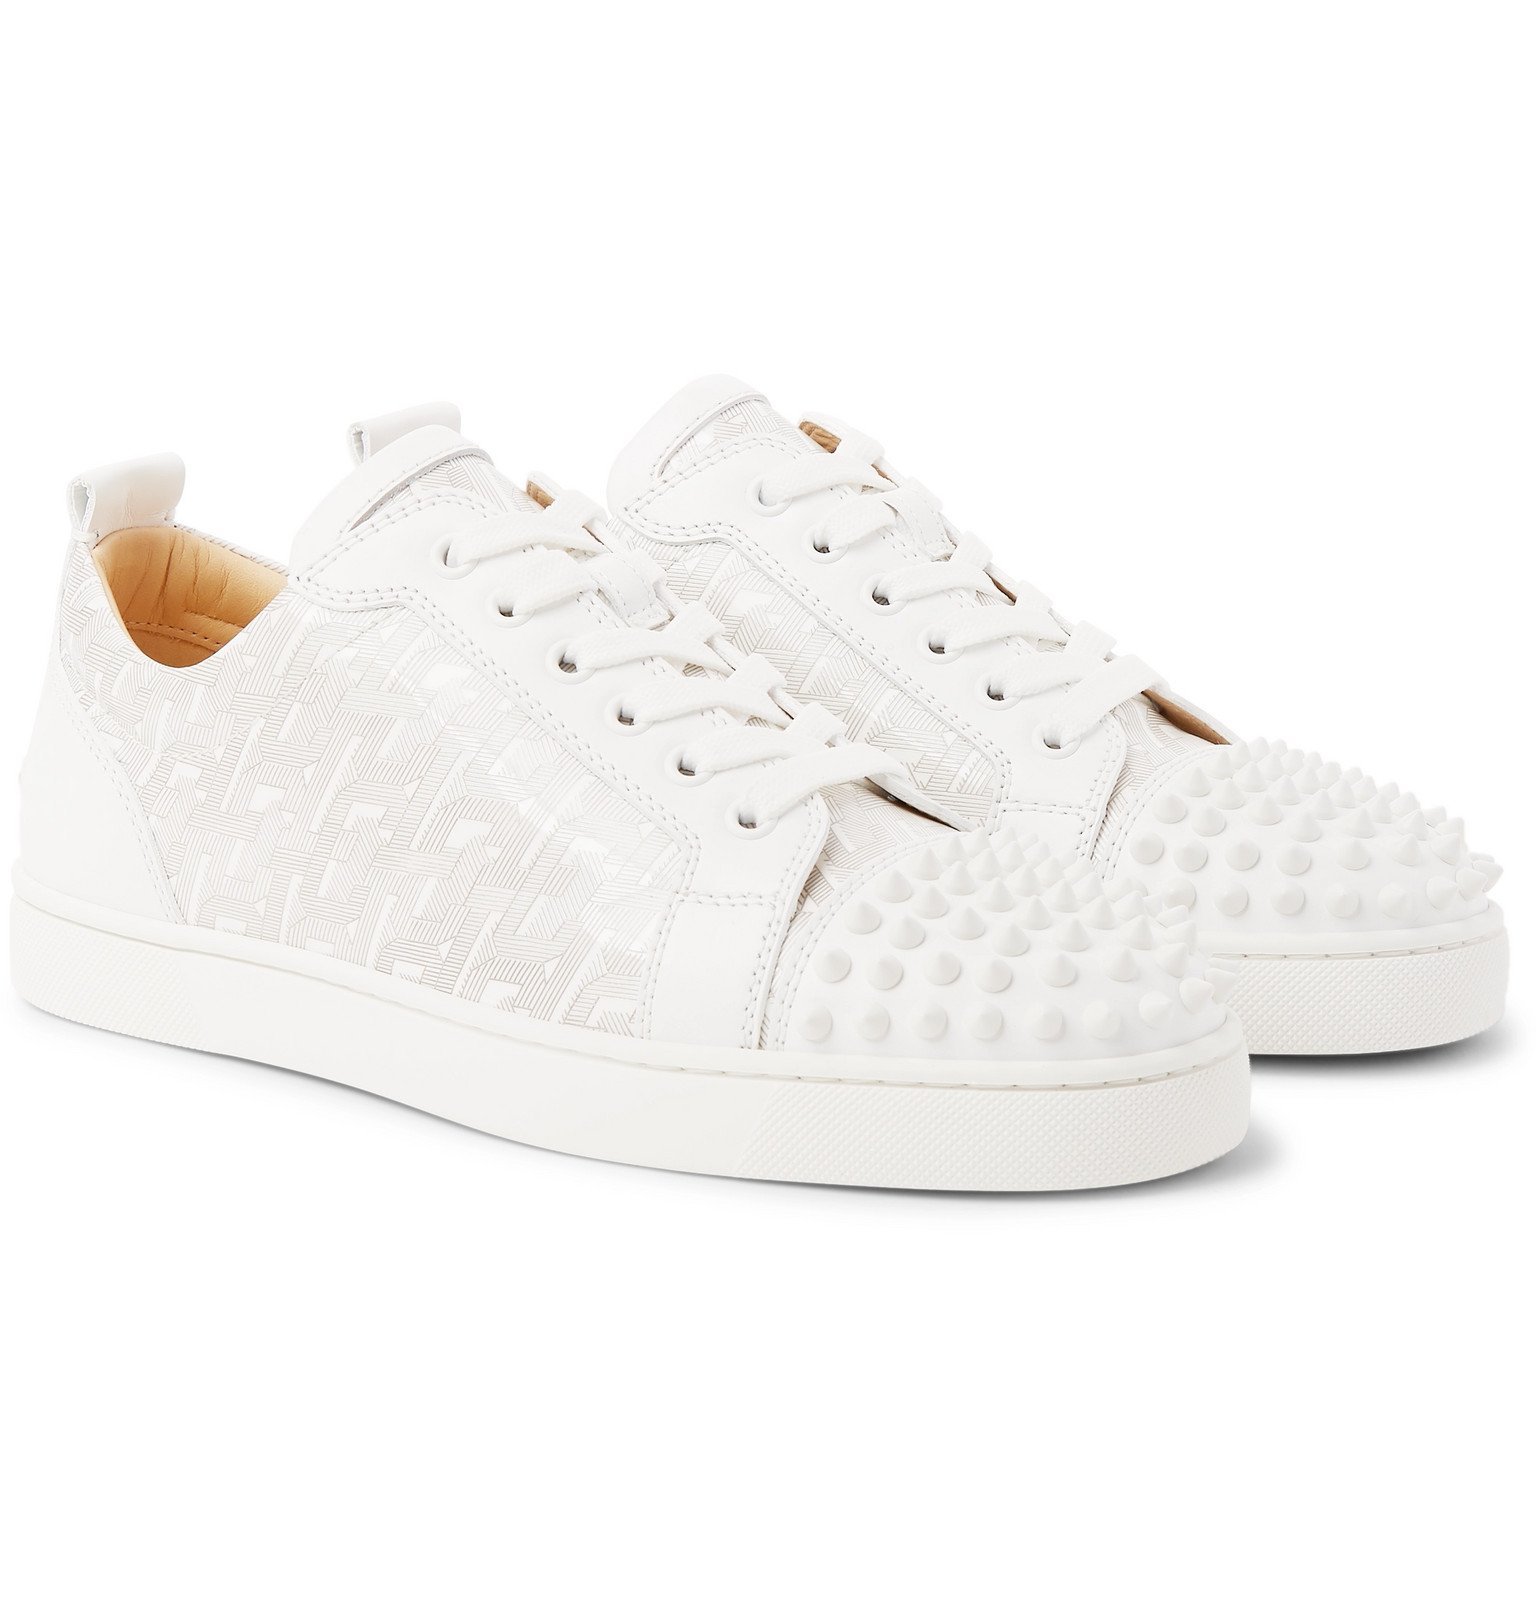 Christian - Louis Junior Spikes Printed Leather Sneakers - White Christian Louboutin